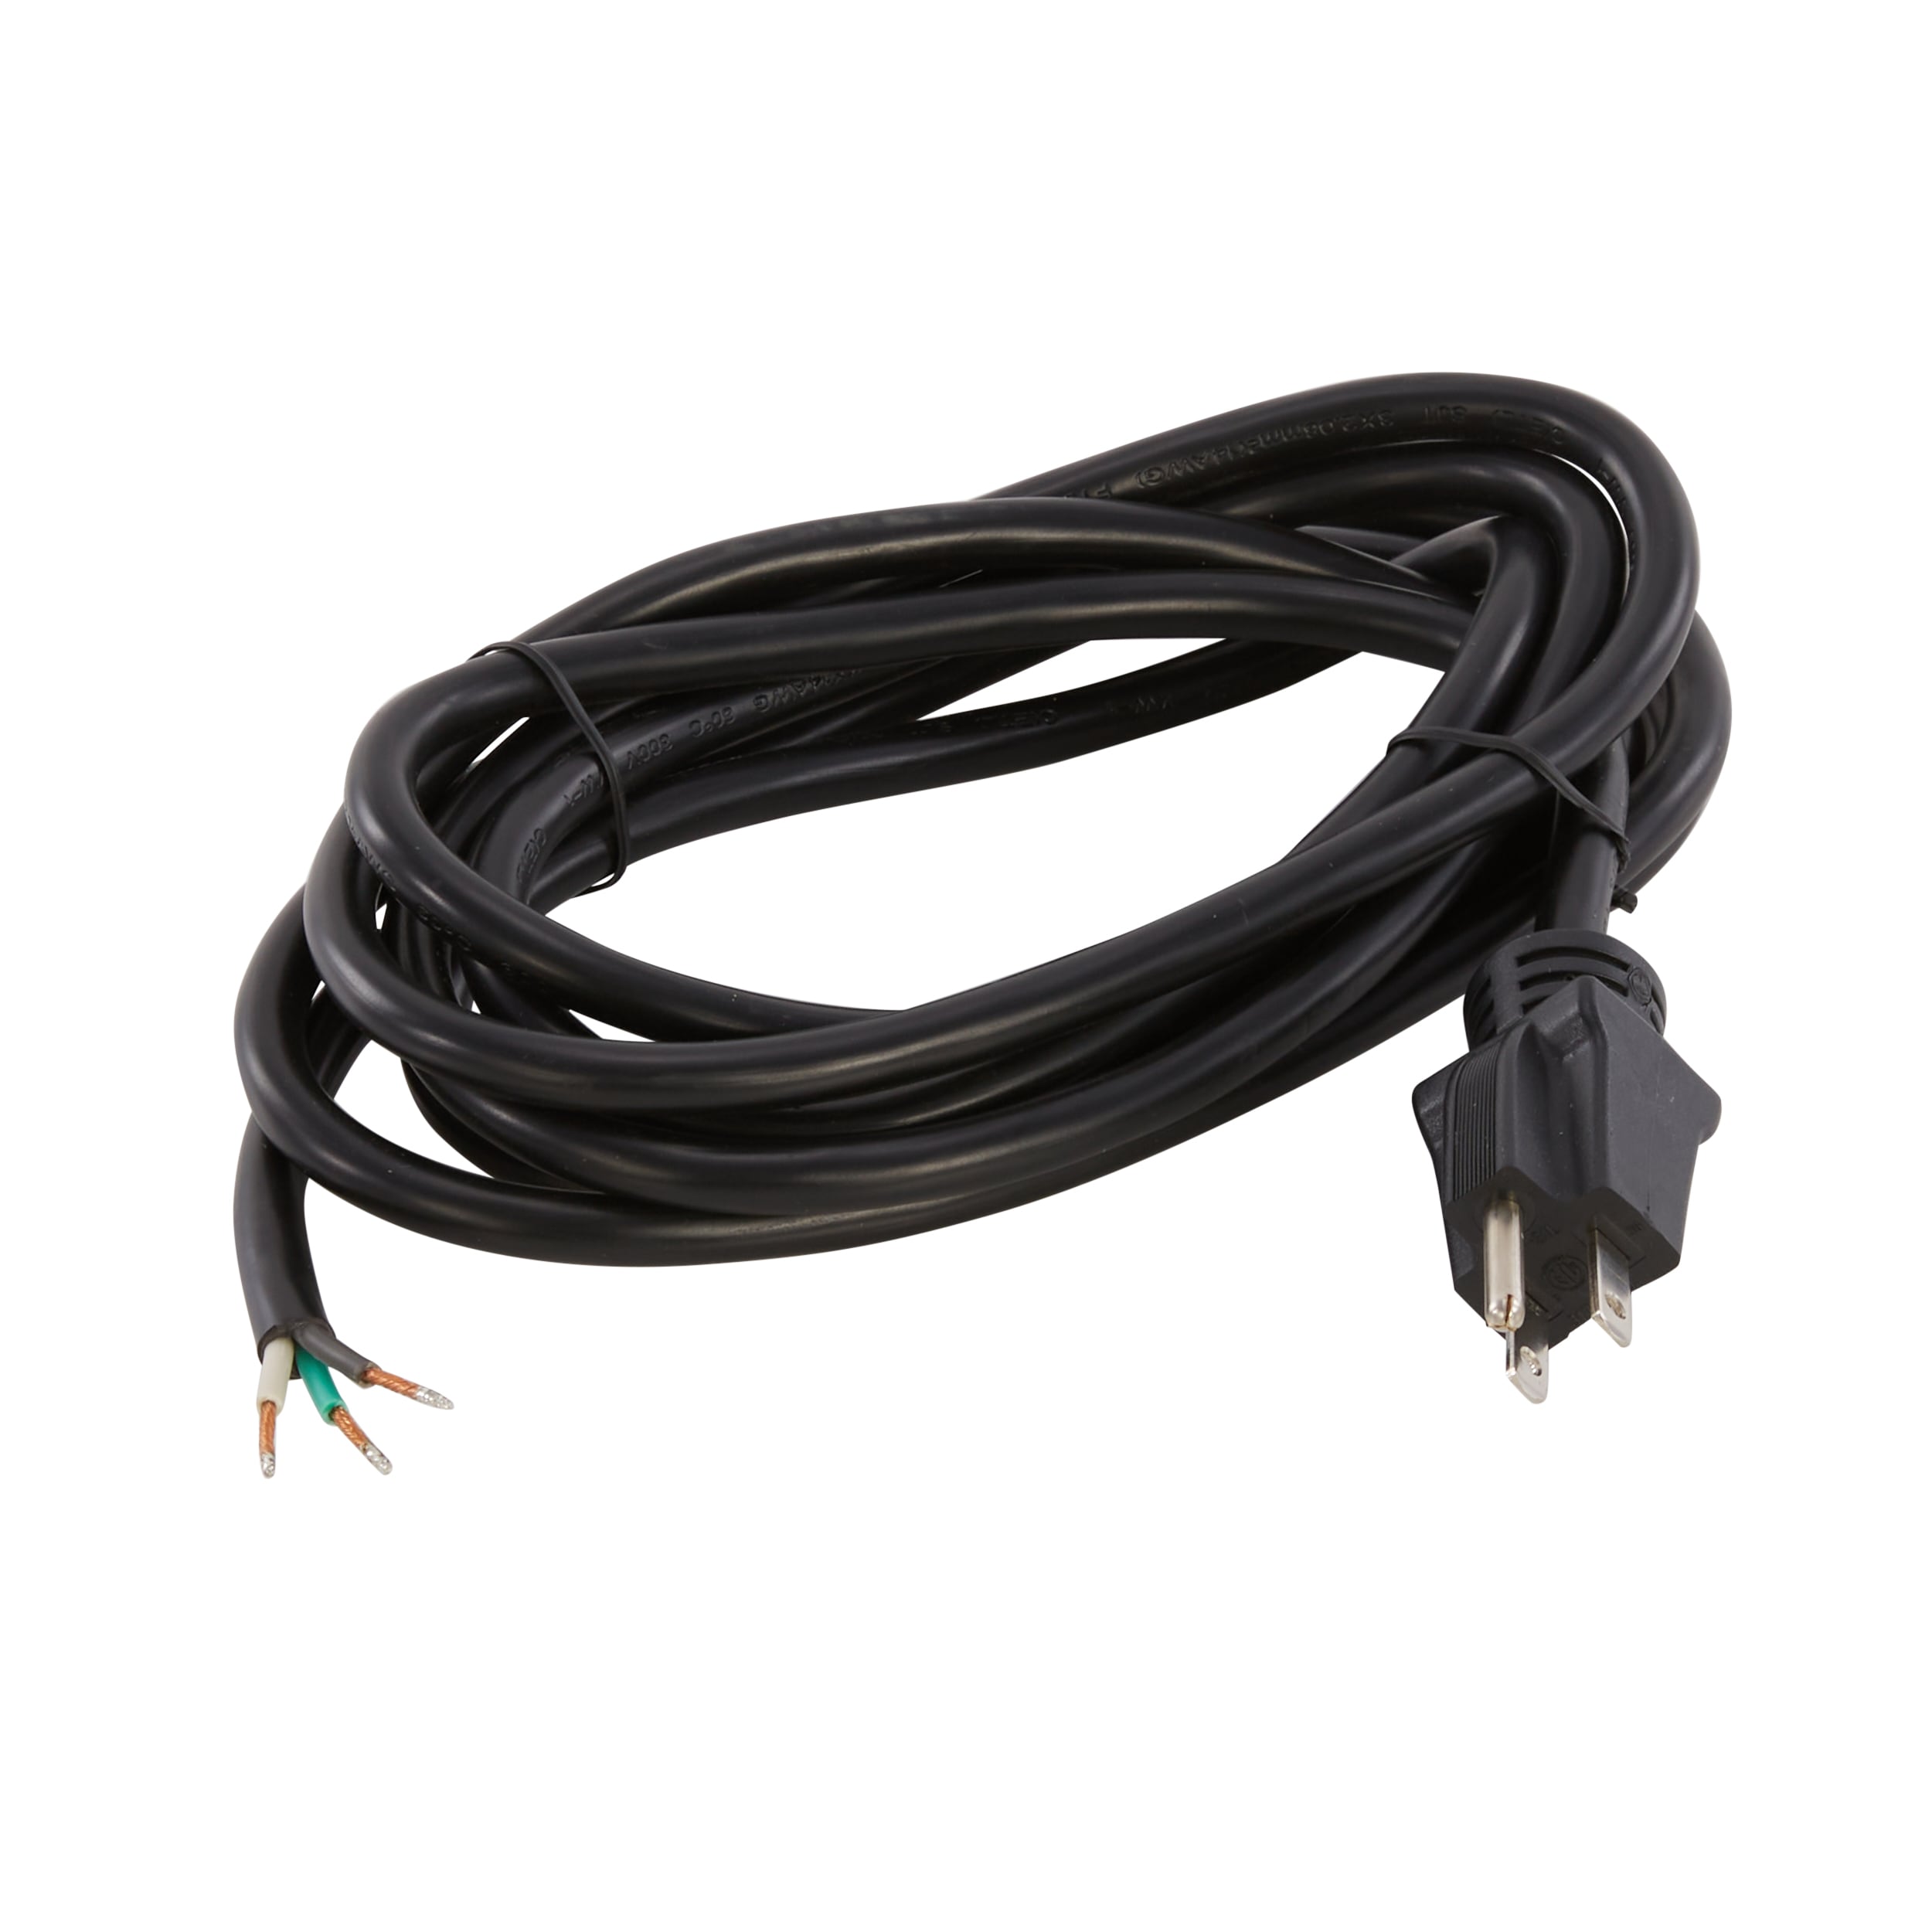 LINK2HOME Extension Cords & Surge Protectors at